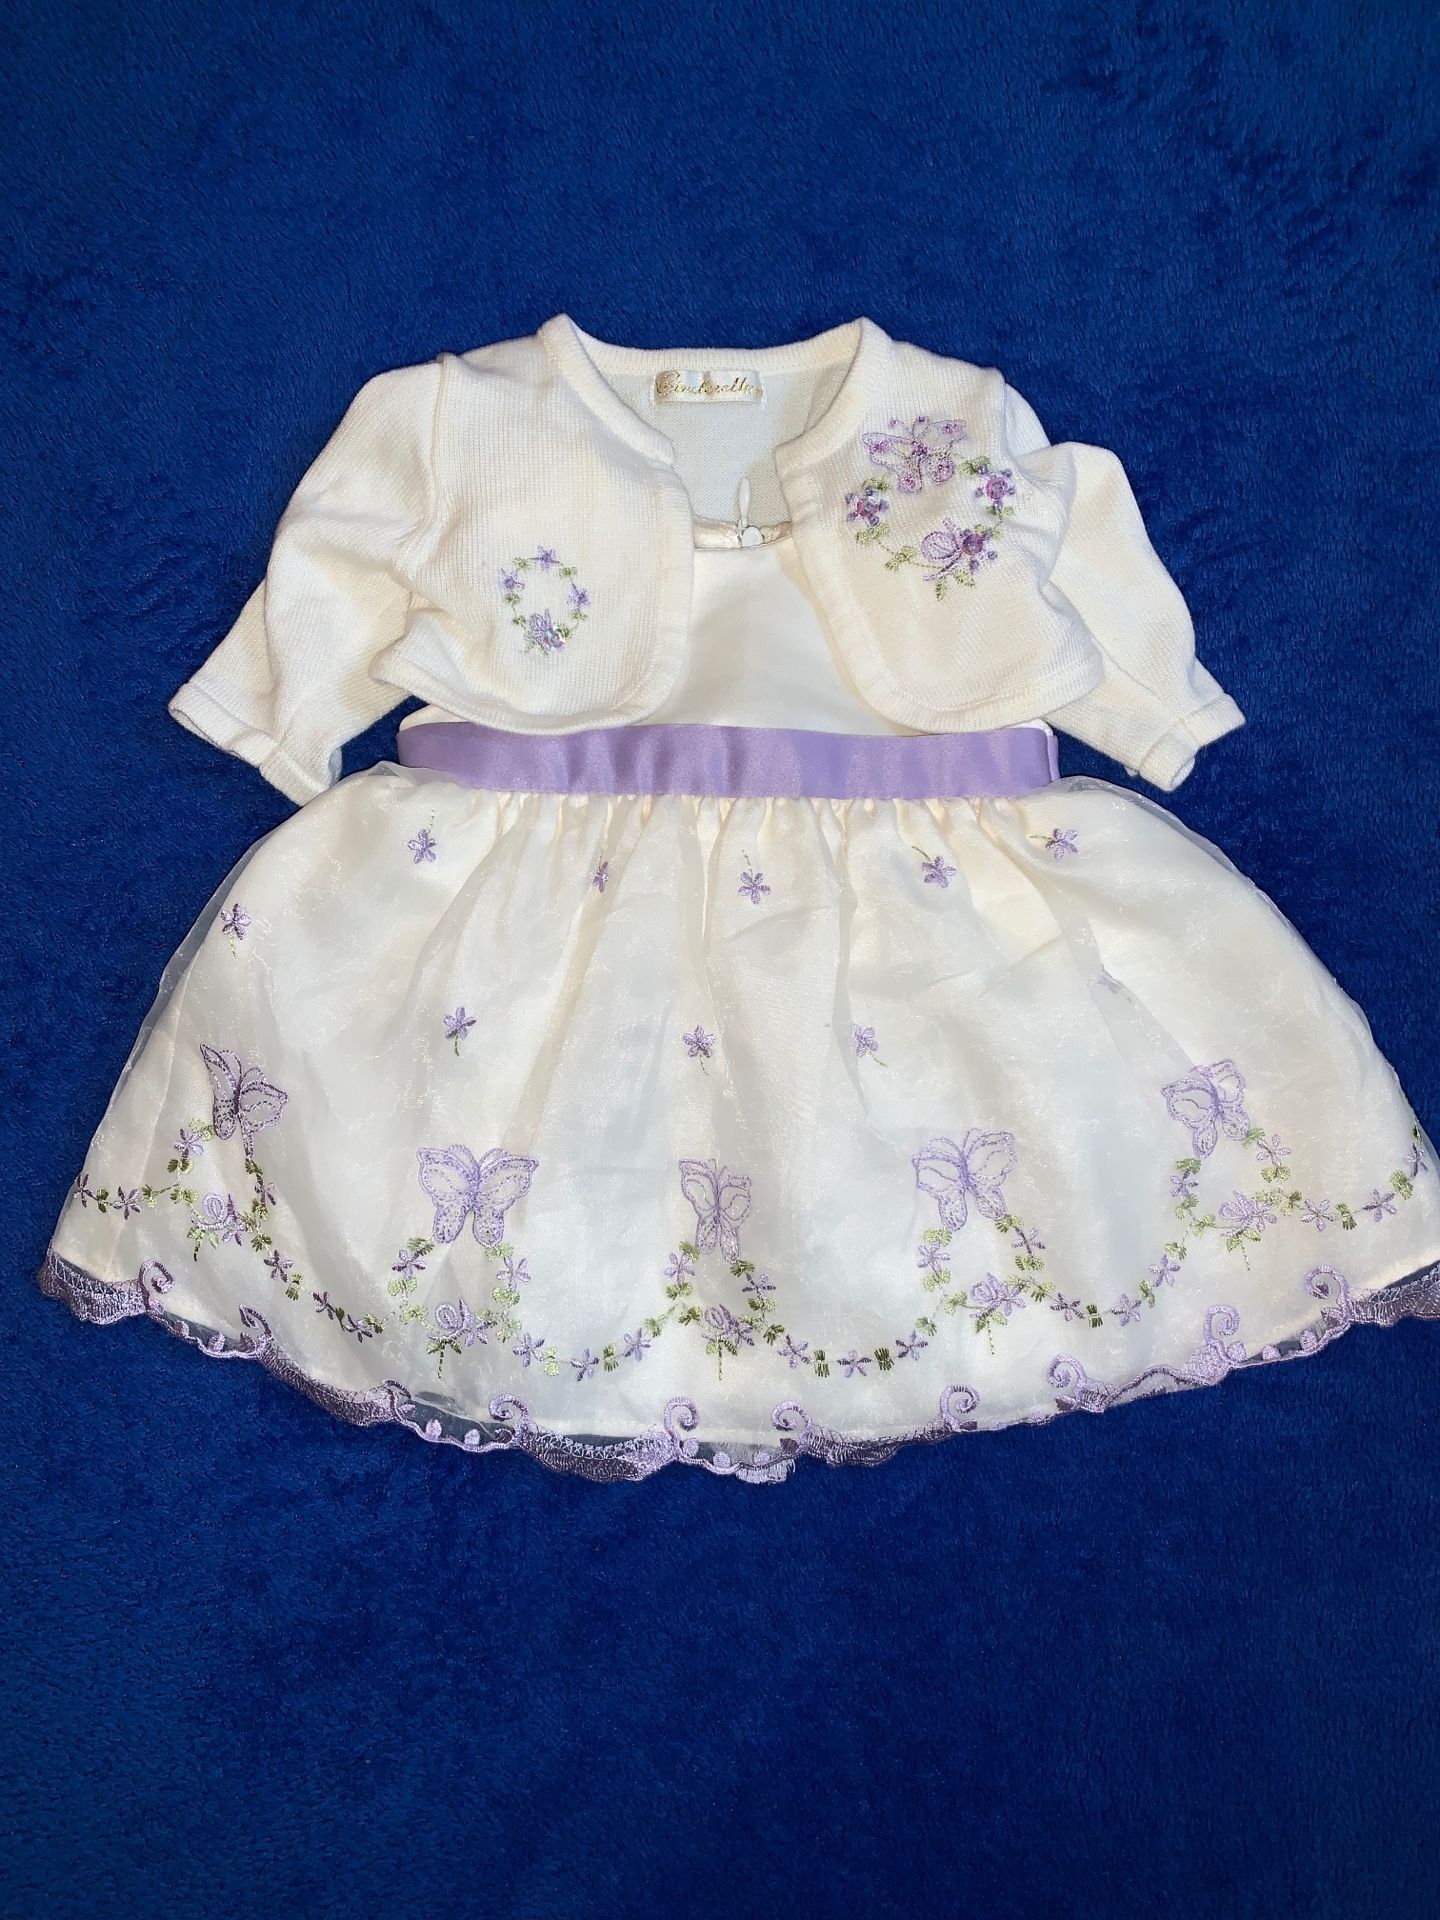 Beautiful Baby Girl Dress Size 3 Months 2 piece worn only once or twice for Easter and pictures